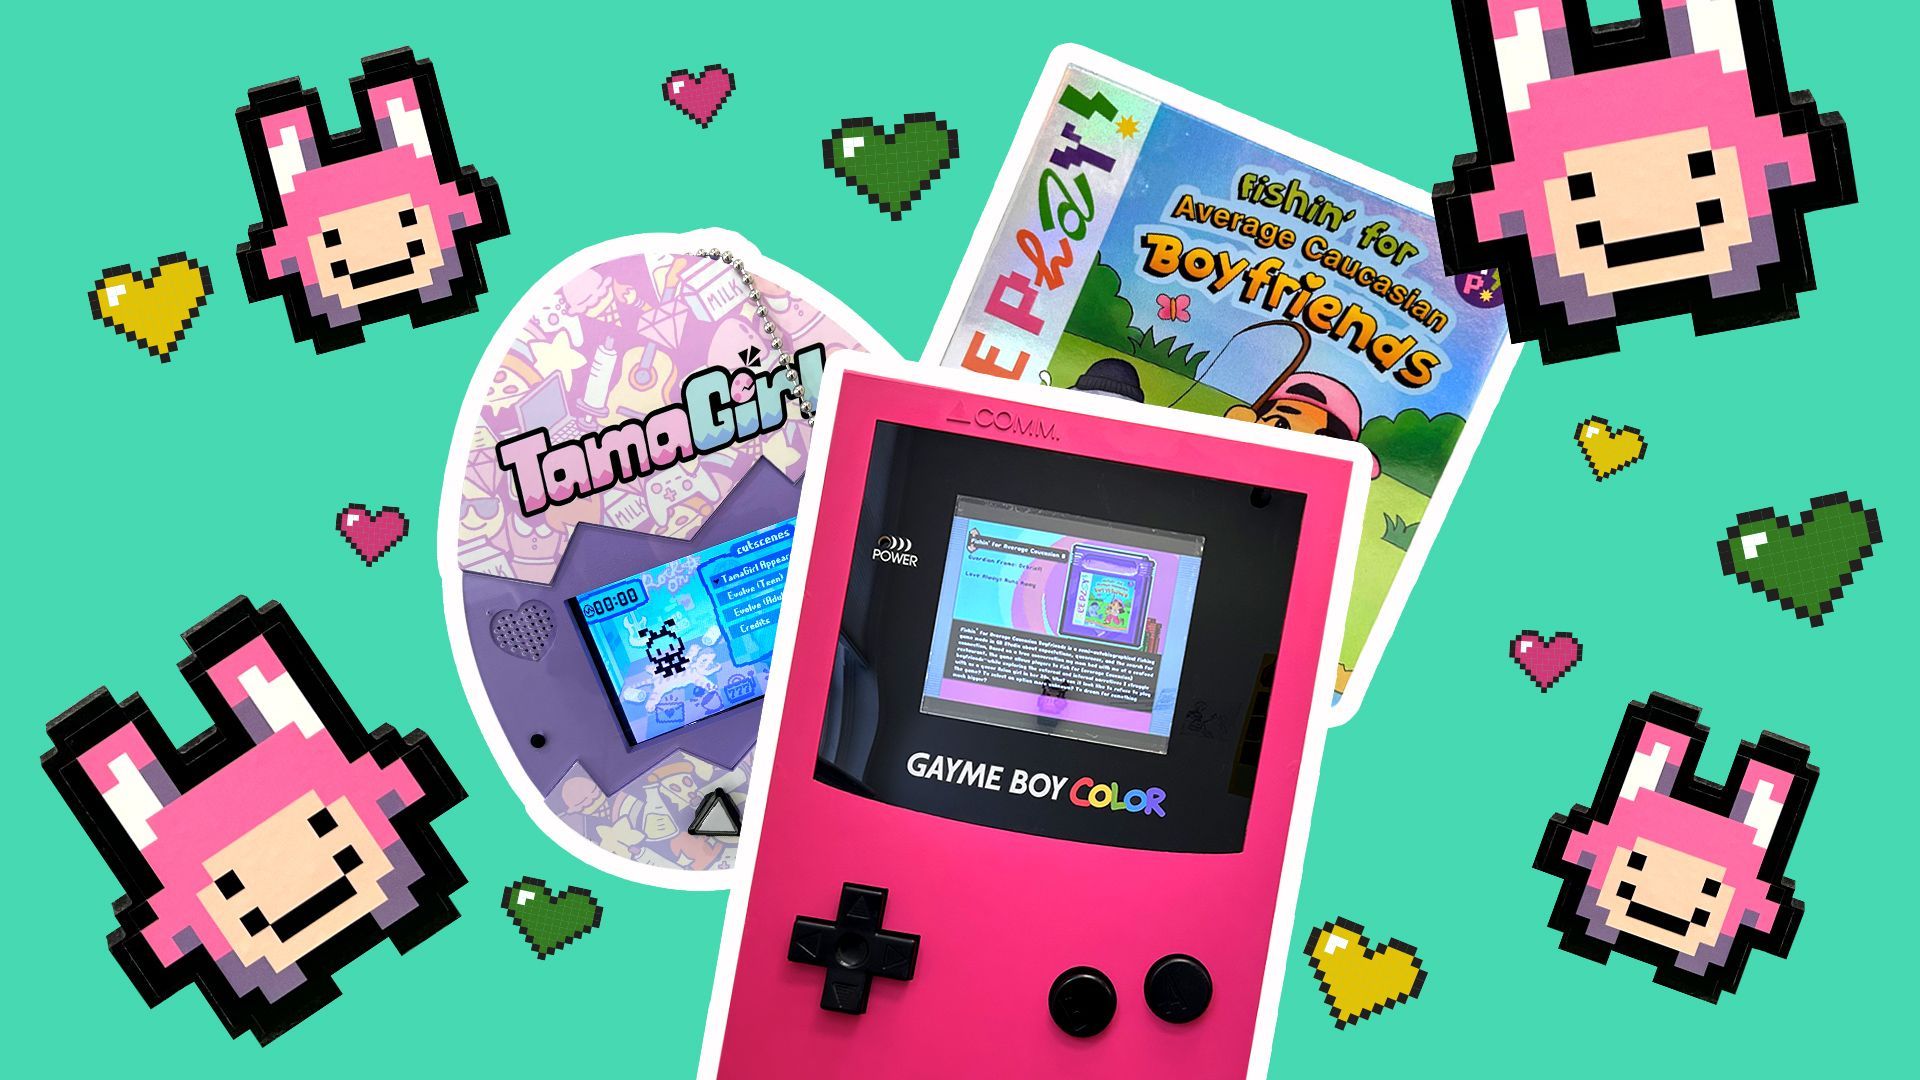 Illustrated collage of pixelated hearts and characters around a giant Game Boy Color, a "TamaGirl" and a close up of a video game box. 